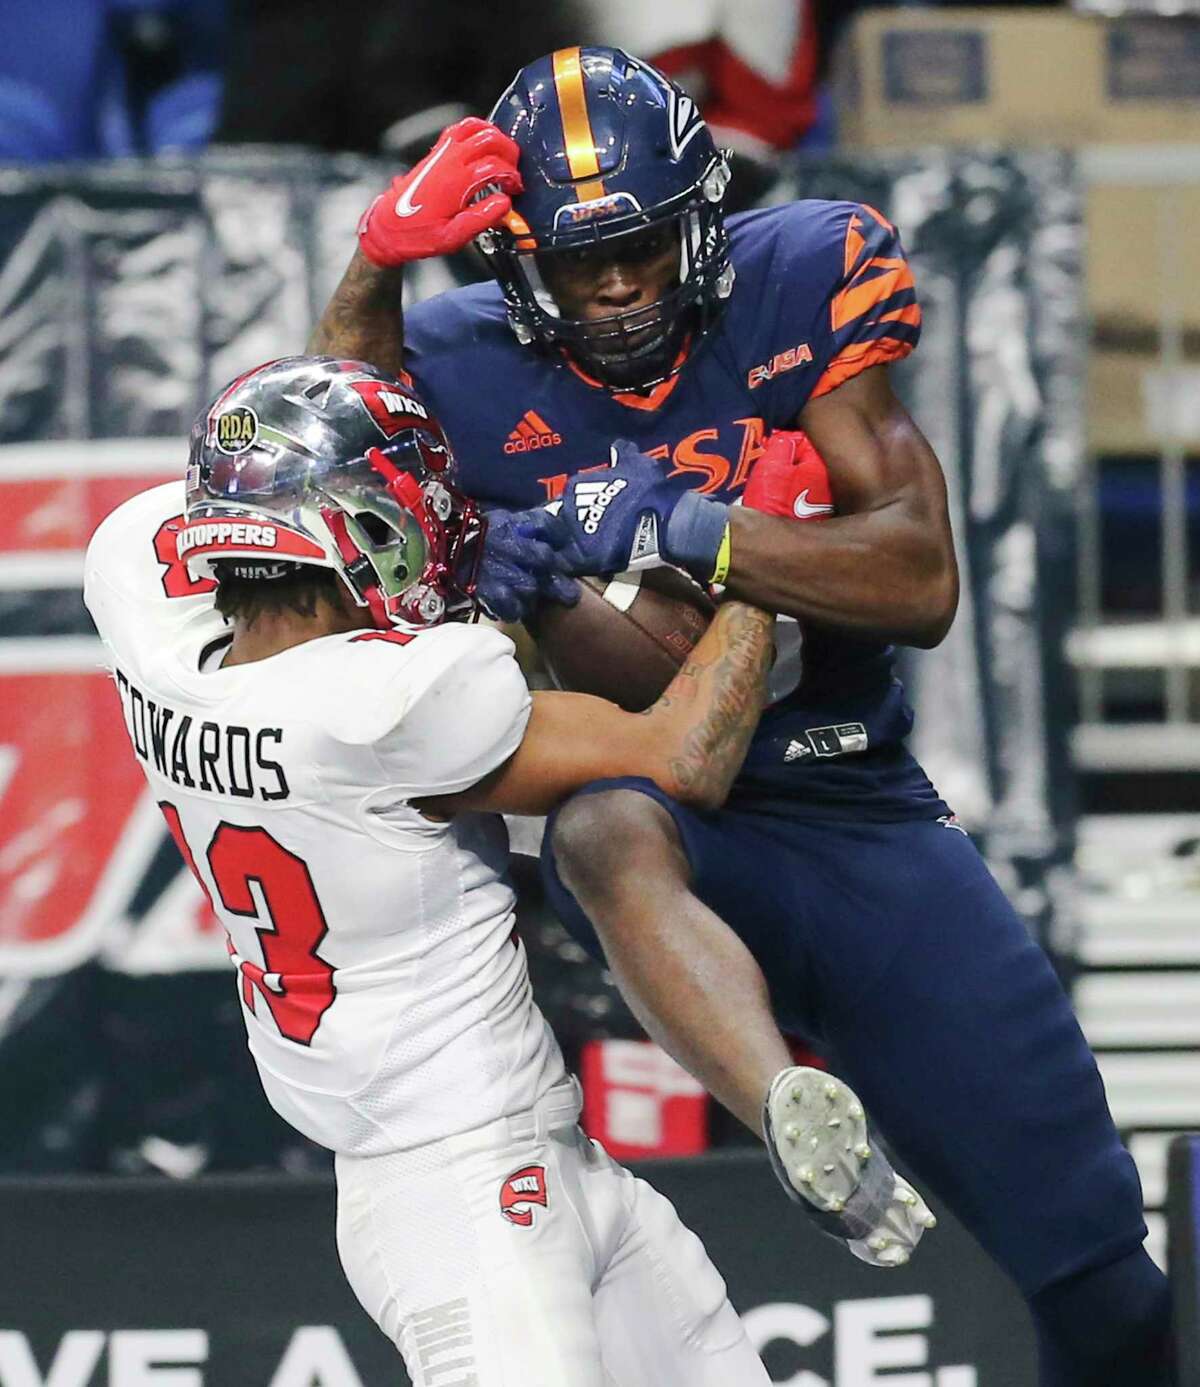 UTSA De’Corian Clark (88) snags a pass for a touchdown against Western Kentucky's Miguel Edwards (13) to extend UTSA's lead in the 4th quarter during the 2021 Conference USA Championship football game at the Alamodome on Friday, Dec. 3, 2021. The Roadrunners defeated the Hilltoppers, 49-41, to win the championship.